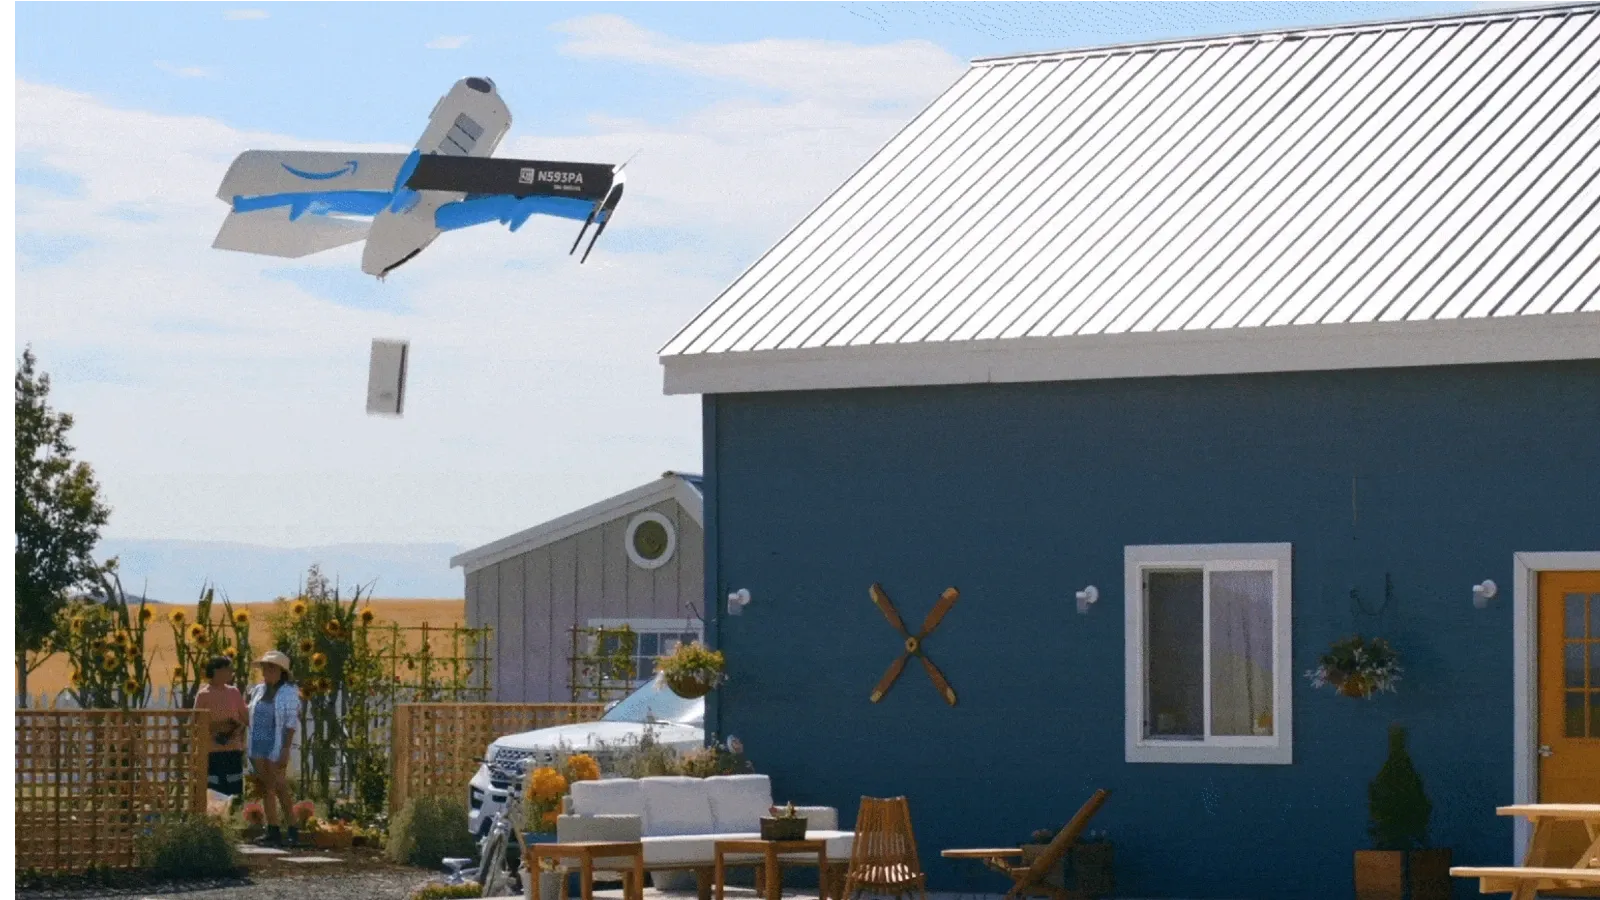 FAA approves Amazon's drone delivery